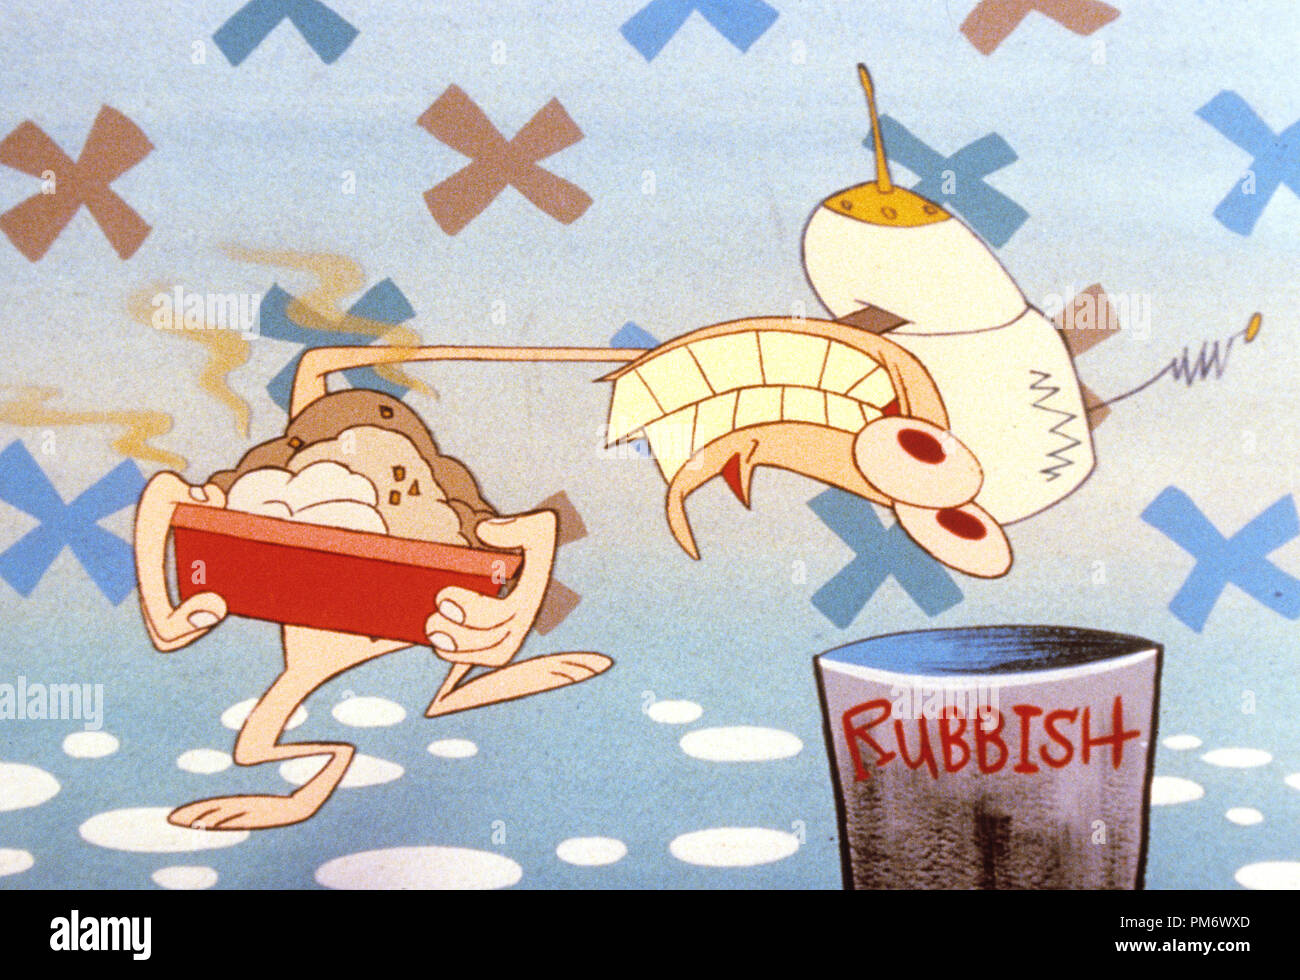 Film Still from 'The Ren and Stimpy Show' 1994   File Reference # 31129041THA  For Editorial Use Only - All Rights Reserved Stock Photo